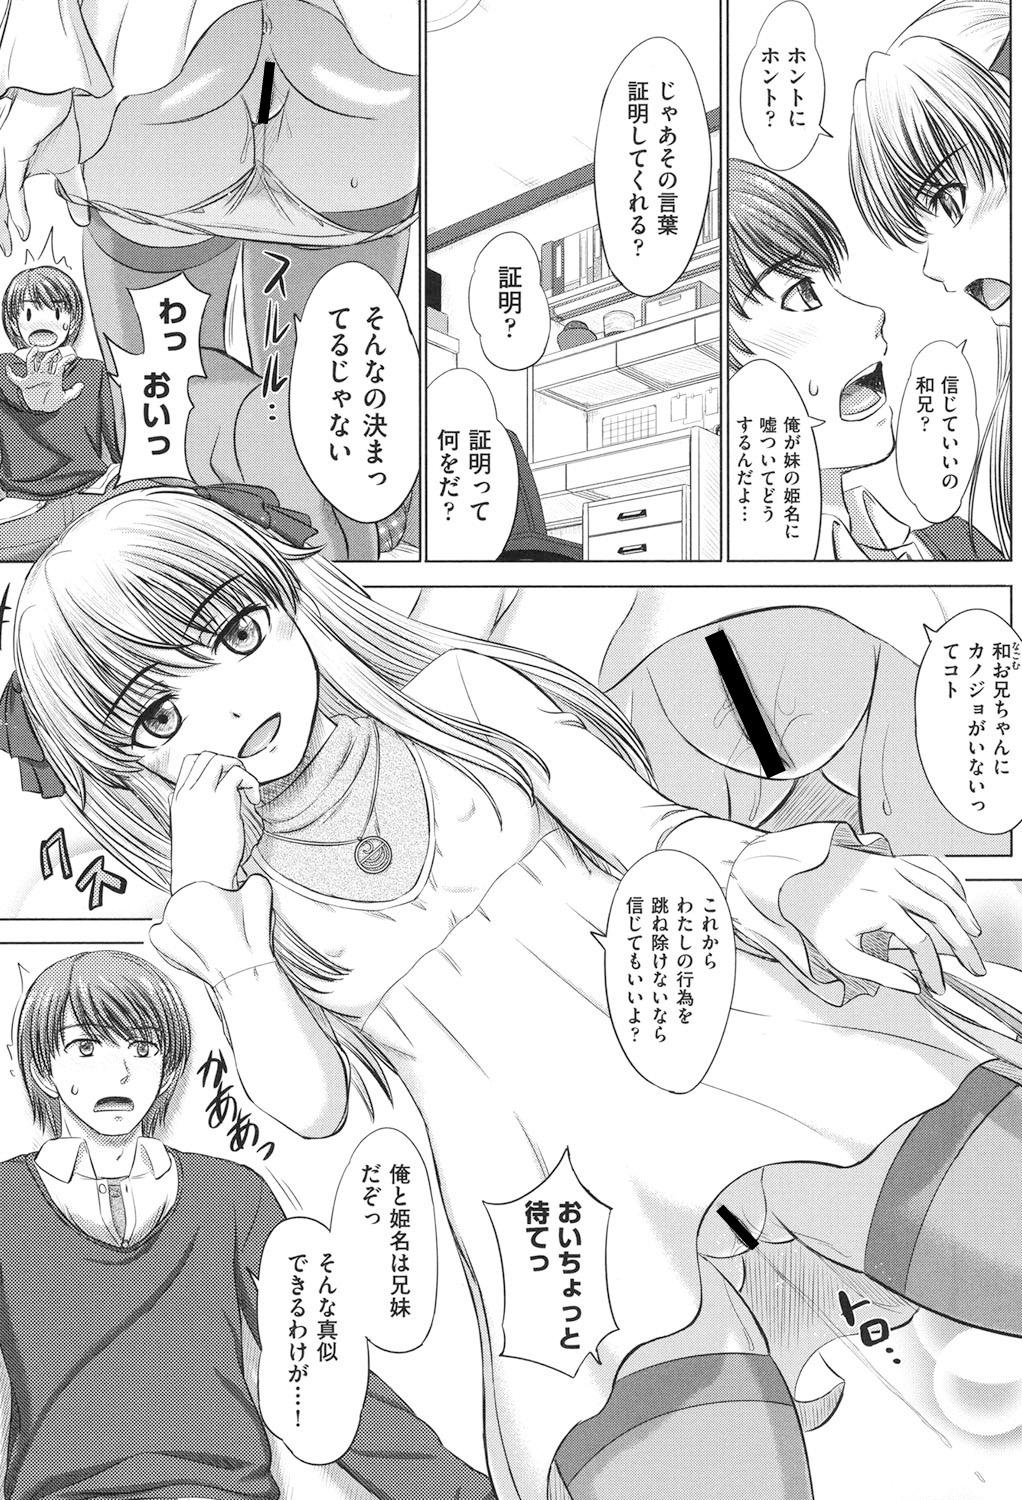 Houkago Kouhai Note - After School Mating Notes 5